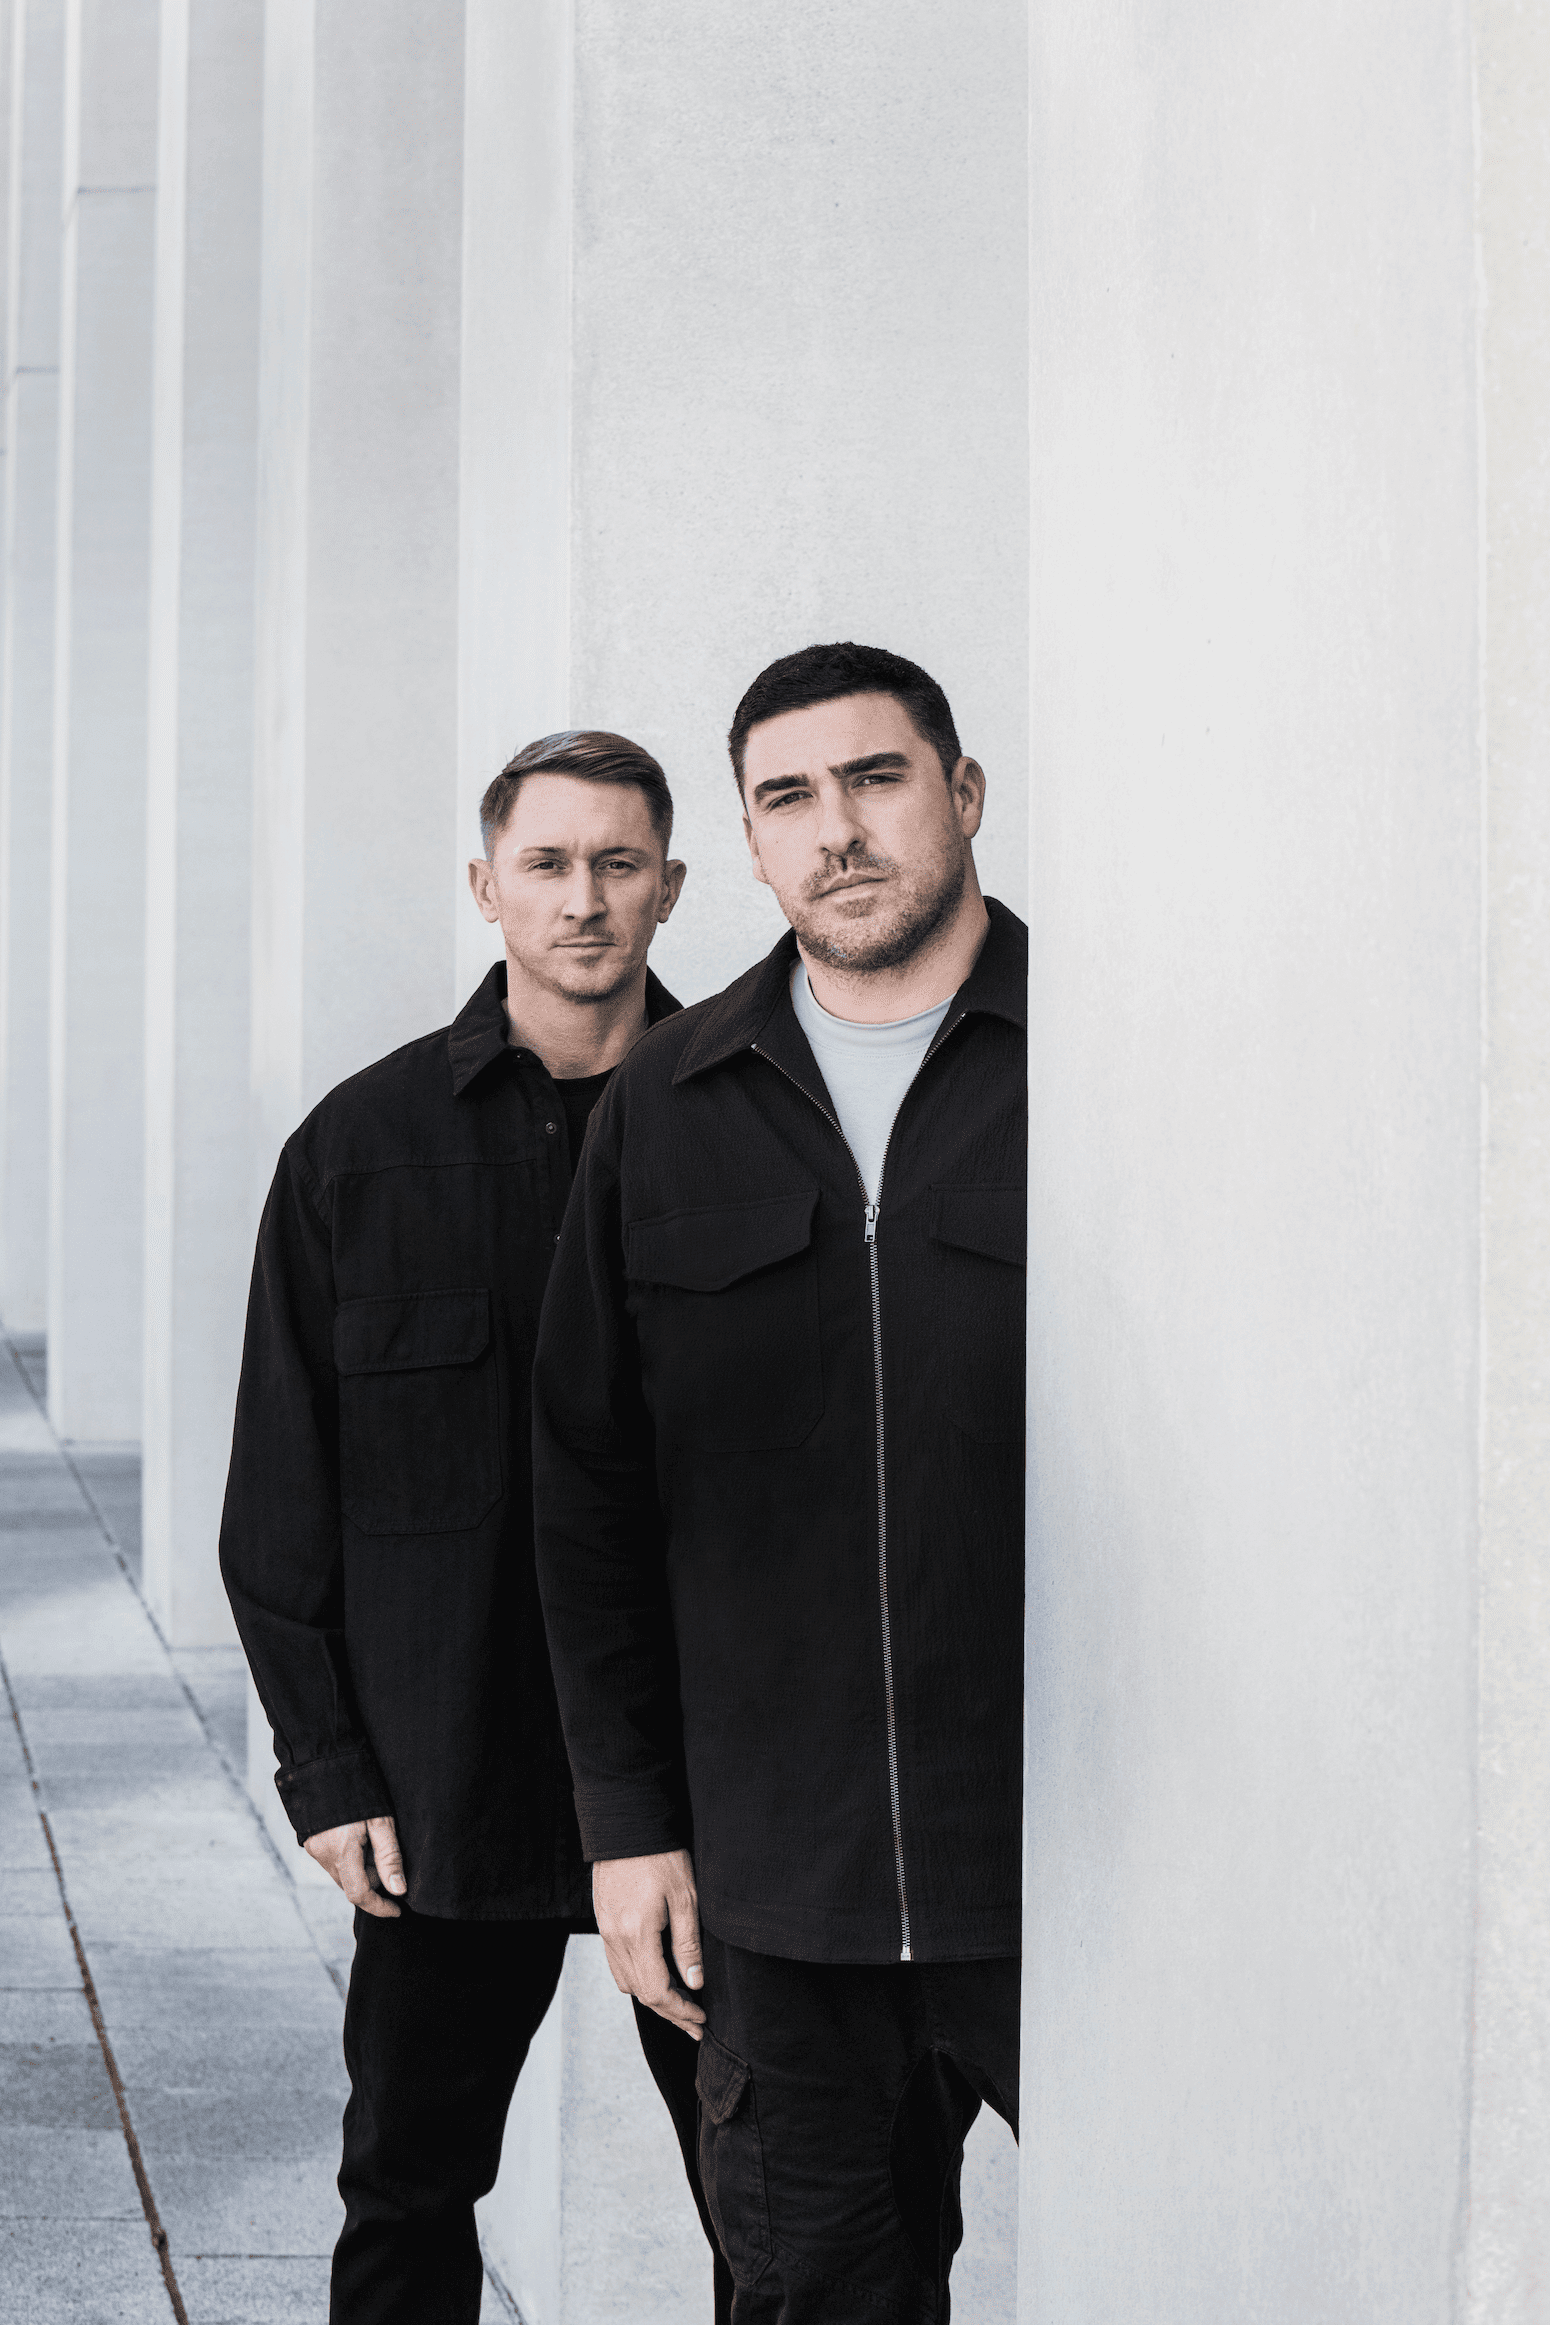 CamelPhat released the first collection of remixes for ‘Spiritual Milk’